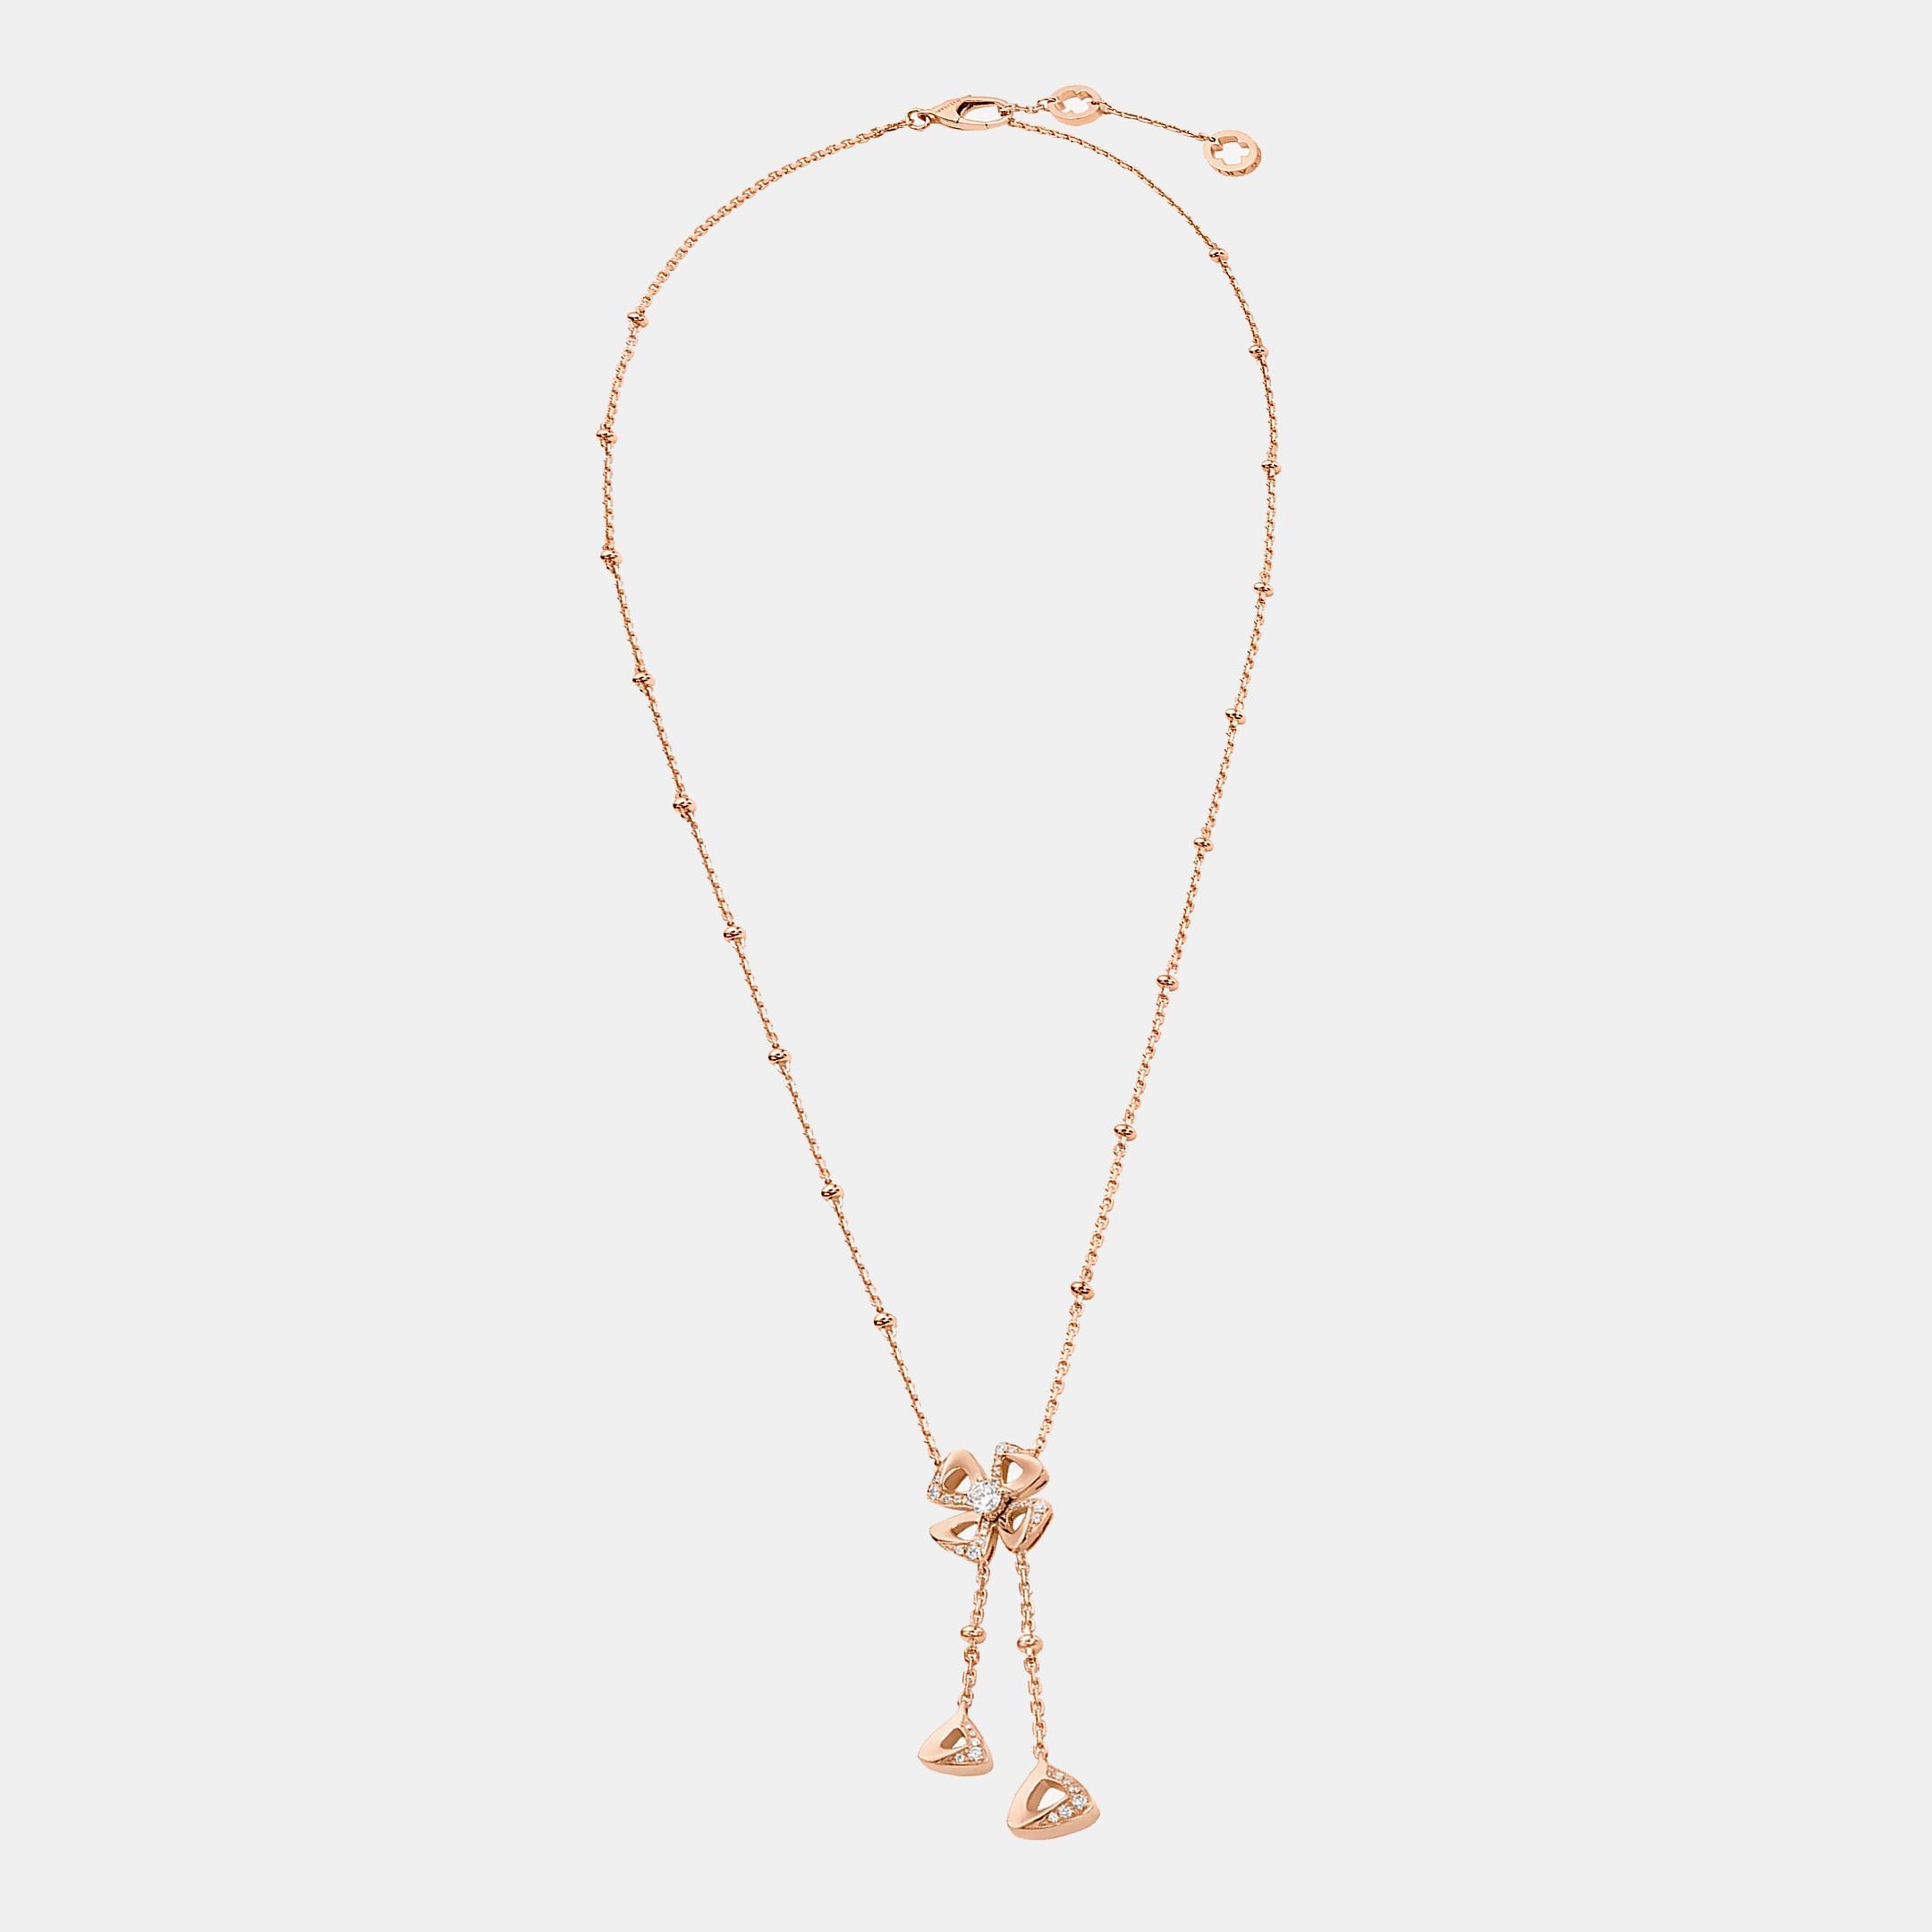 The Bvlgari Fiorever necklace is a captivating piece of jewelry that exudes high elegance. Crafted in exquisite 18K rose gold, it features a delicate chain adorned with a dazzling flower-shaped pendant. The pendant is embellished with brilliant